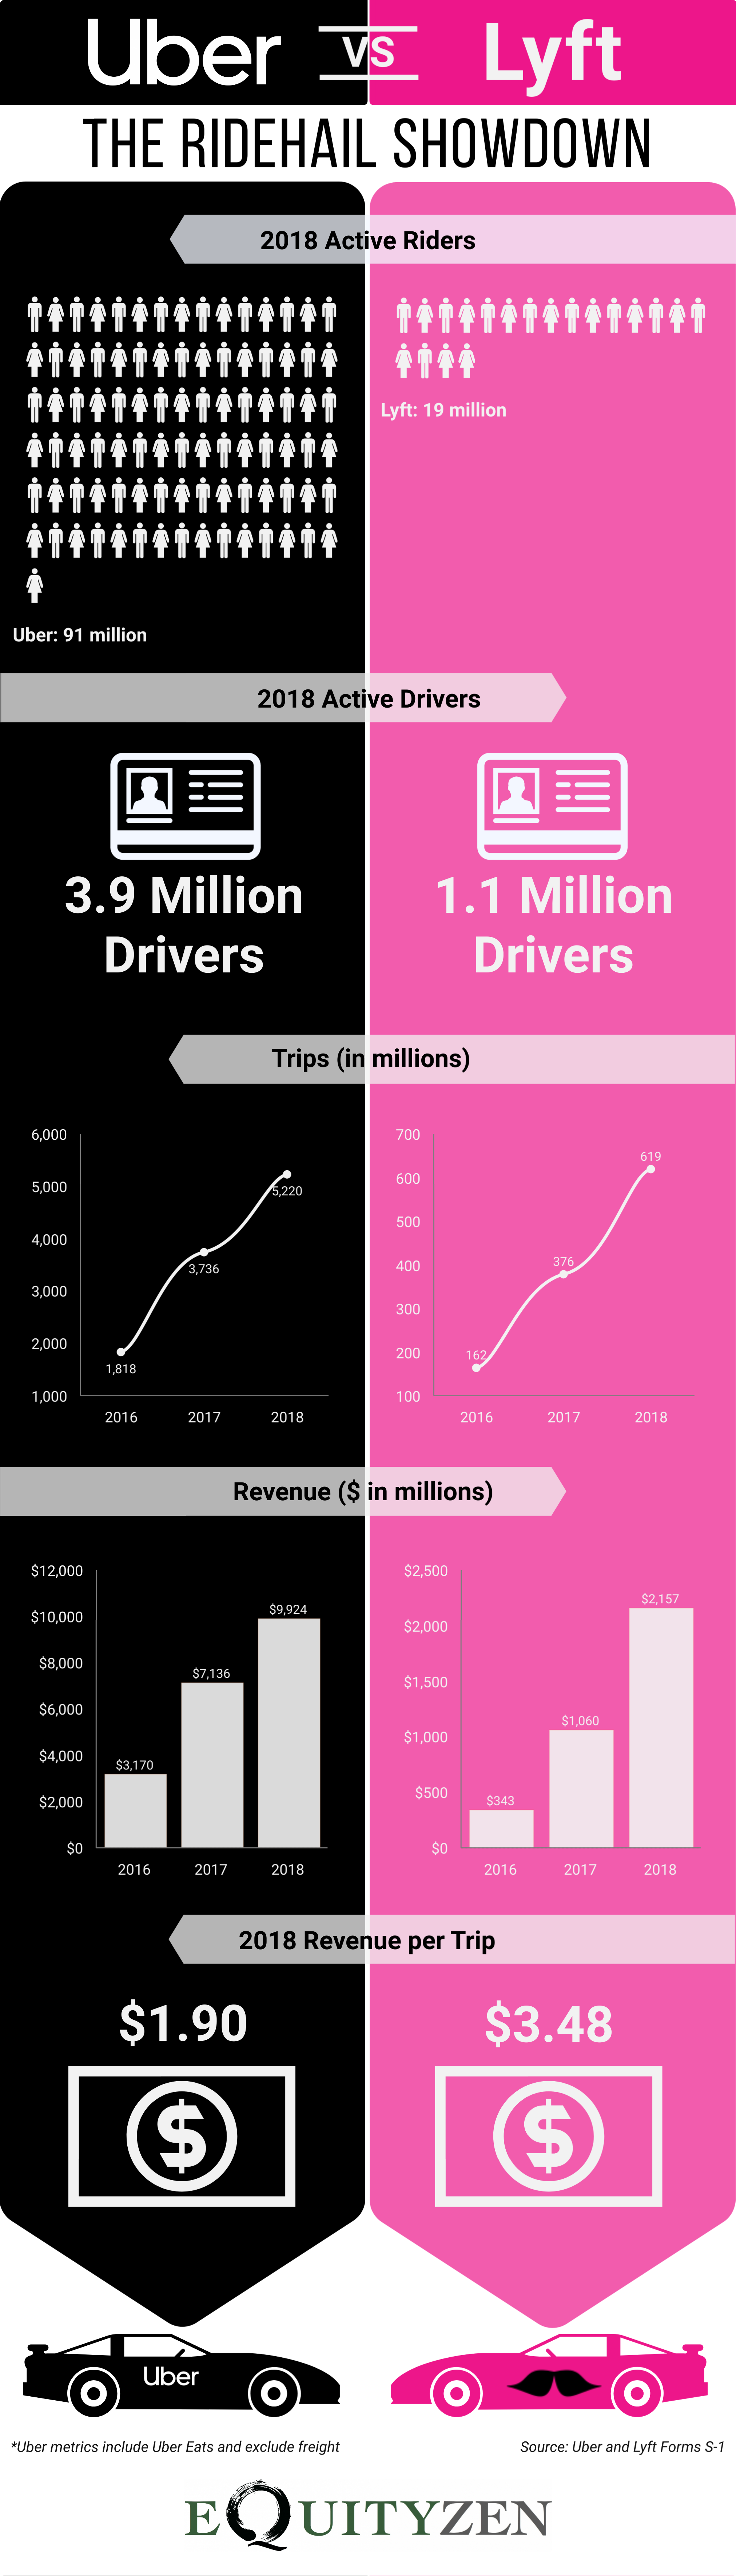 Invest in or sell Lyft stock EquityZen